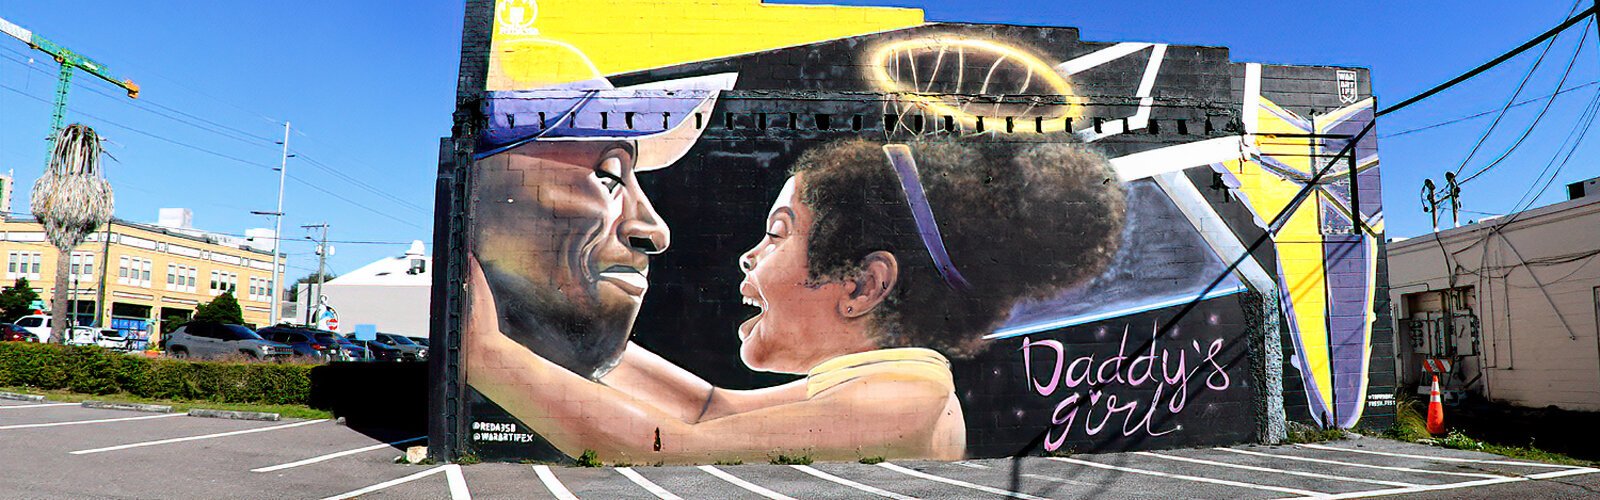 Mural of basketball superstar Kobe Bryant and his daughter Gianna by WARARTIFEX and REDA3SB.